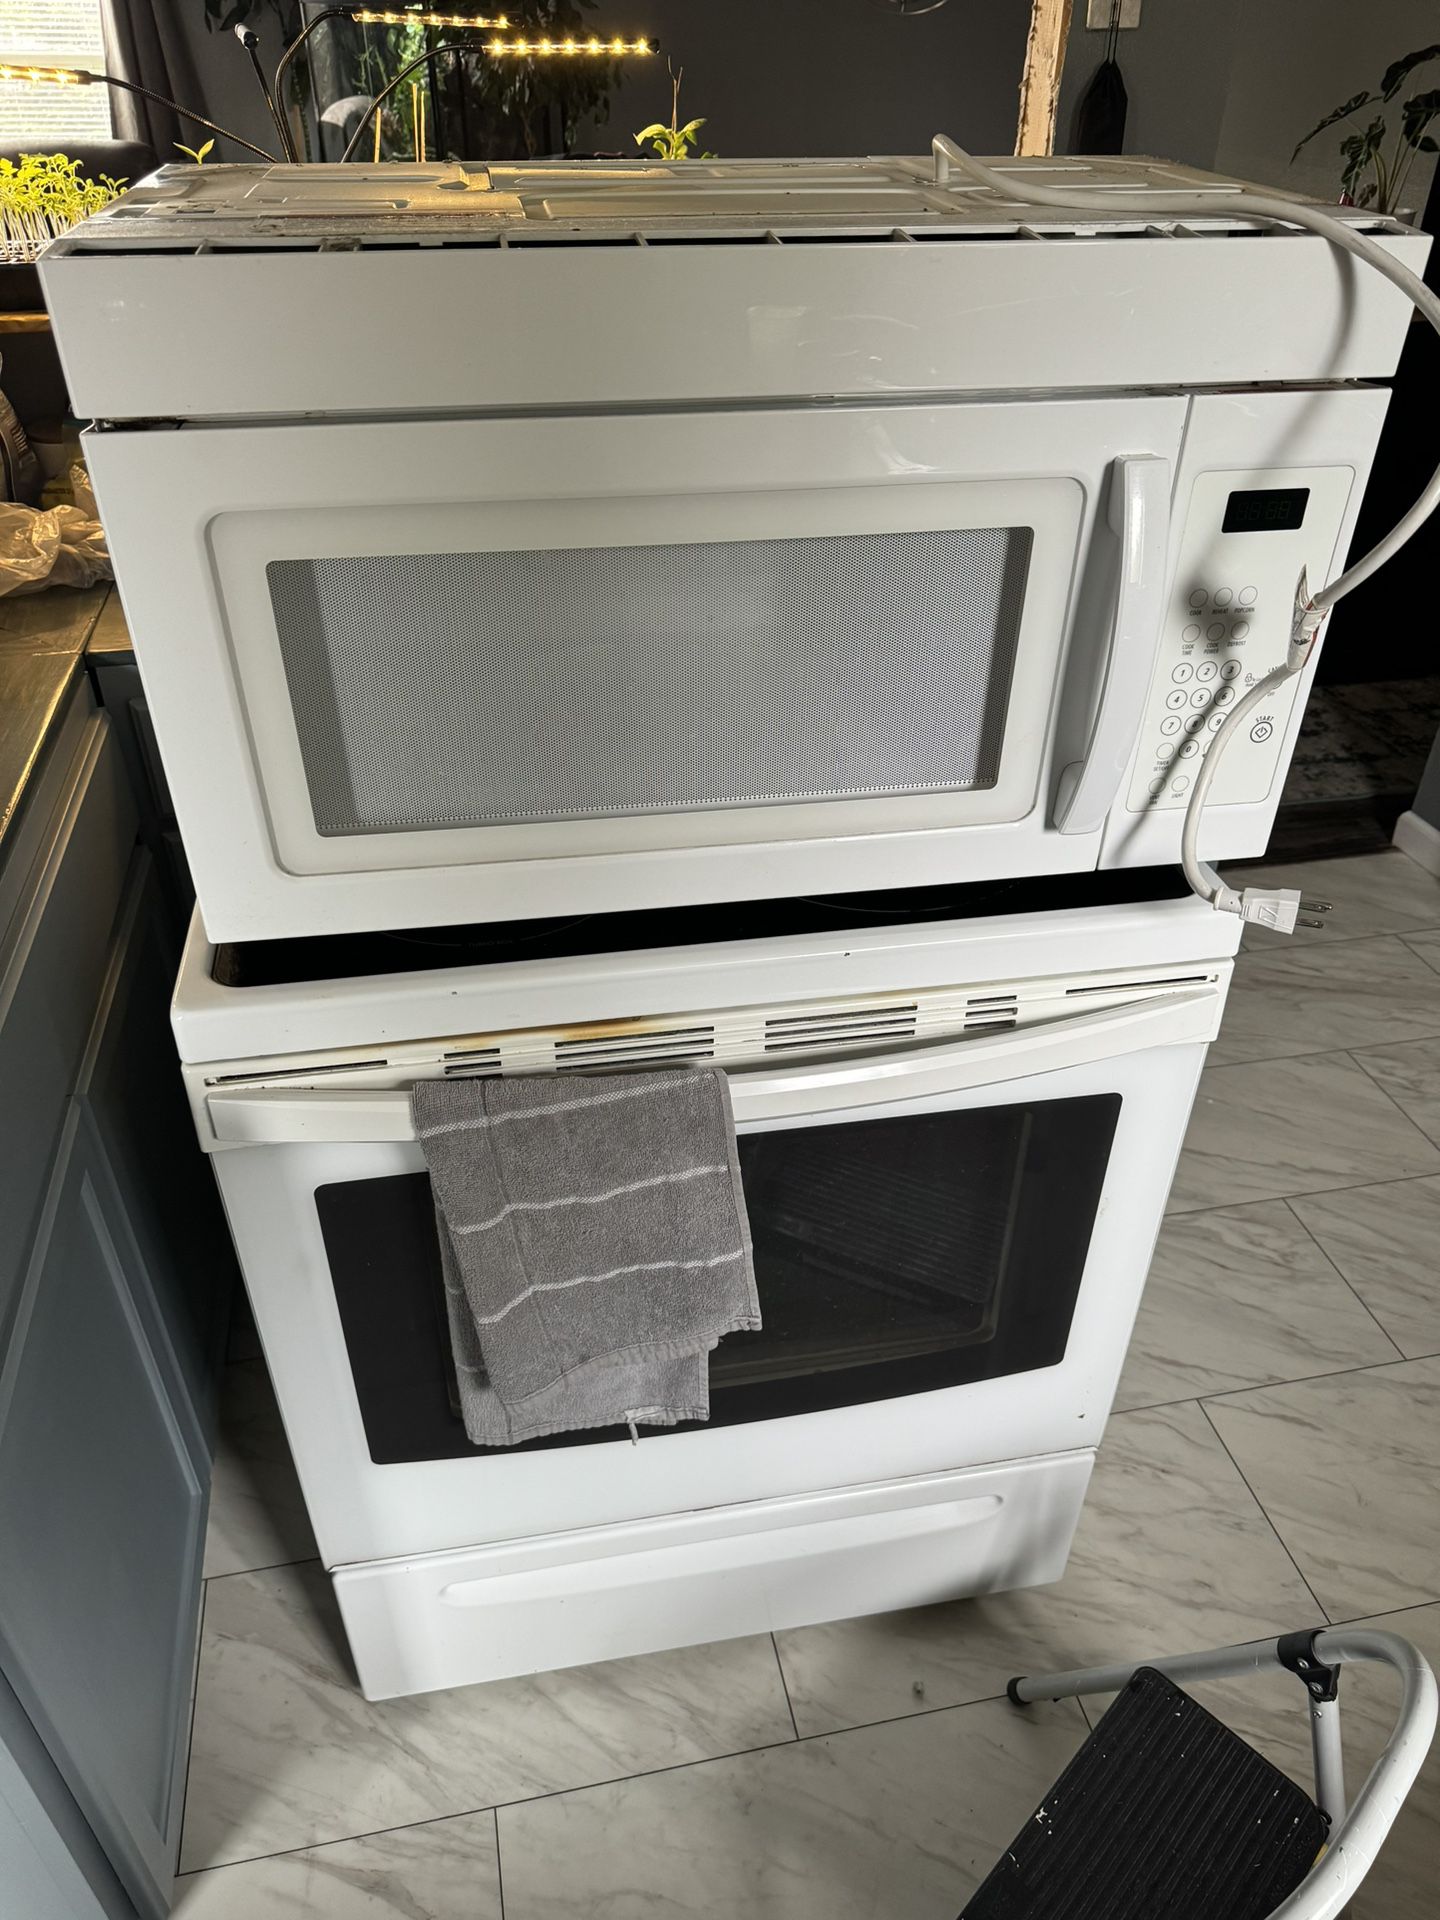 Glass Top Stove And Above Stove Microwave!!